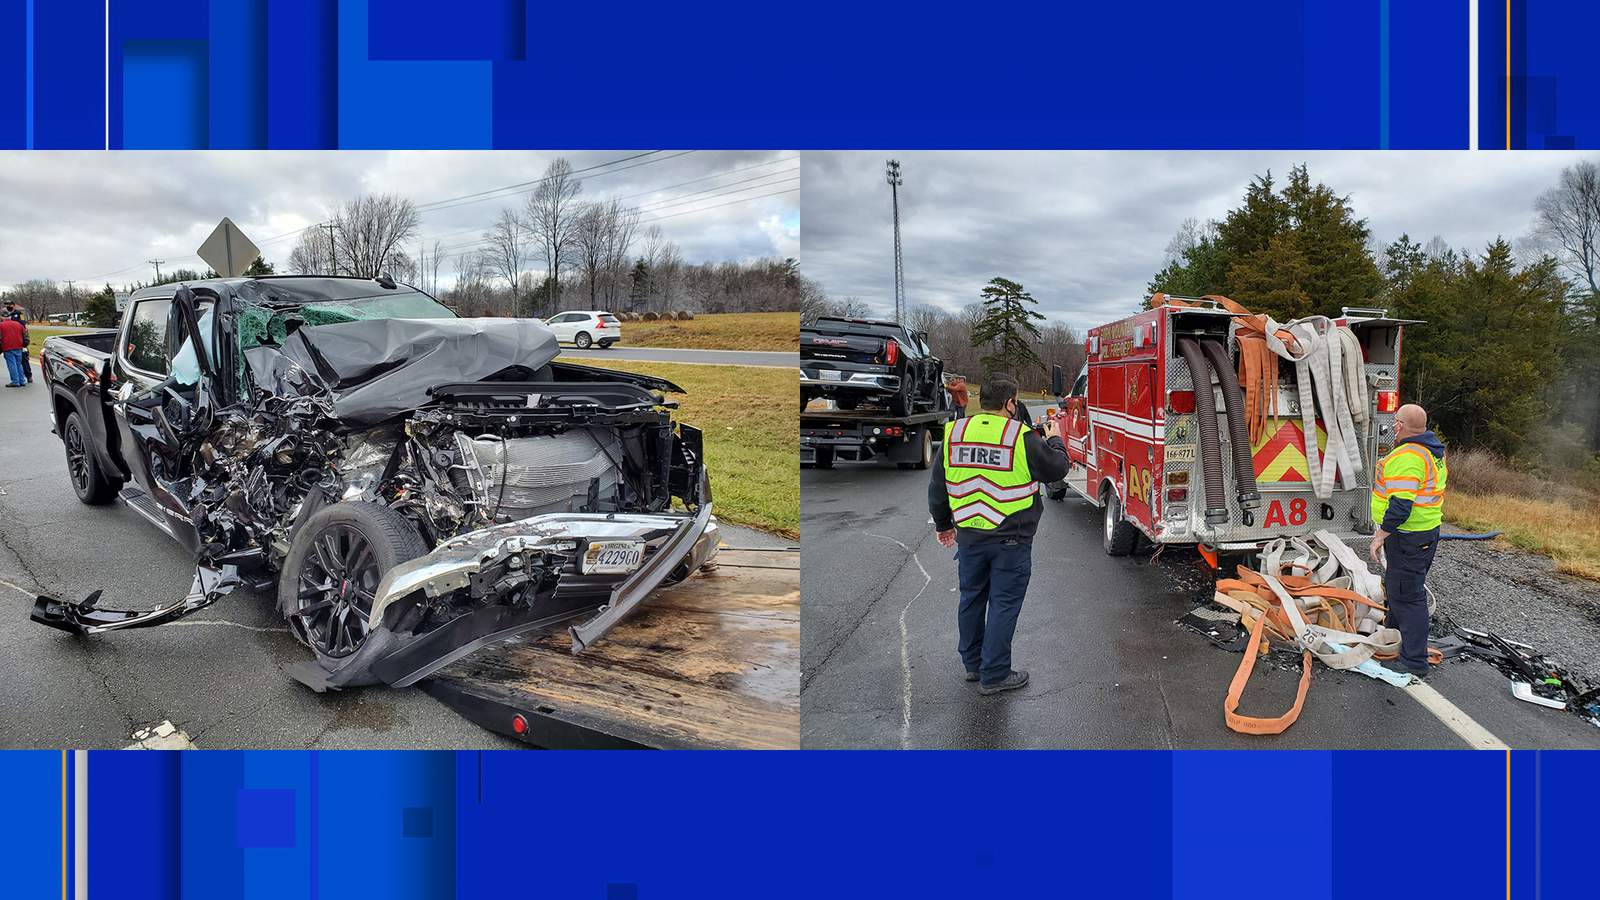 Driver clips ambulance on US-220 in Franklin County, causing lane closures